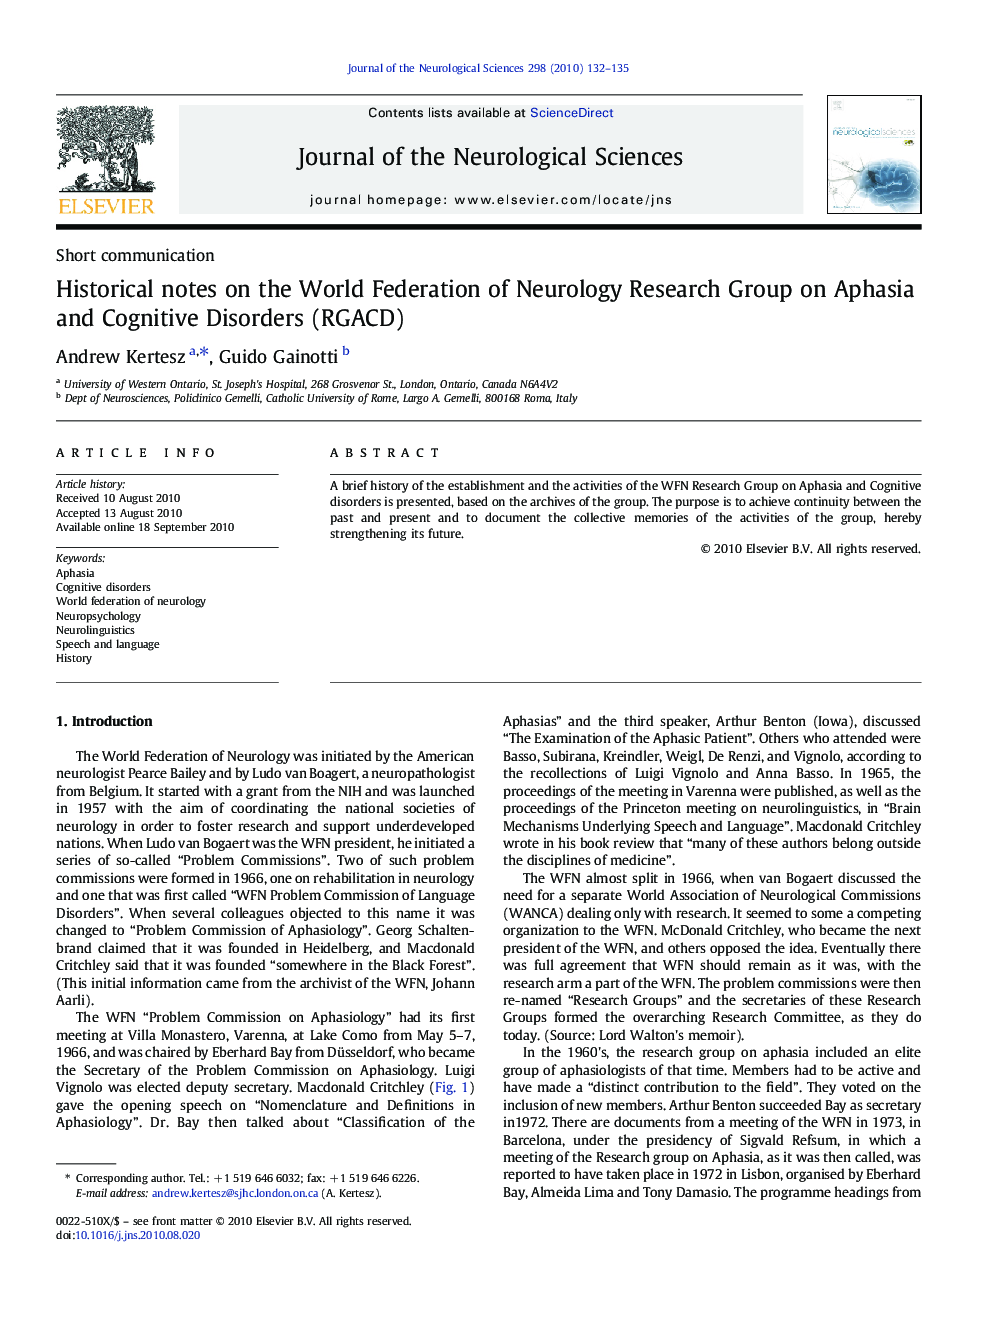 Historical notes on the World Federation of Neurology Research Group on Aphasia and Cognitive Disorders (RGACD)